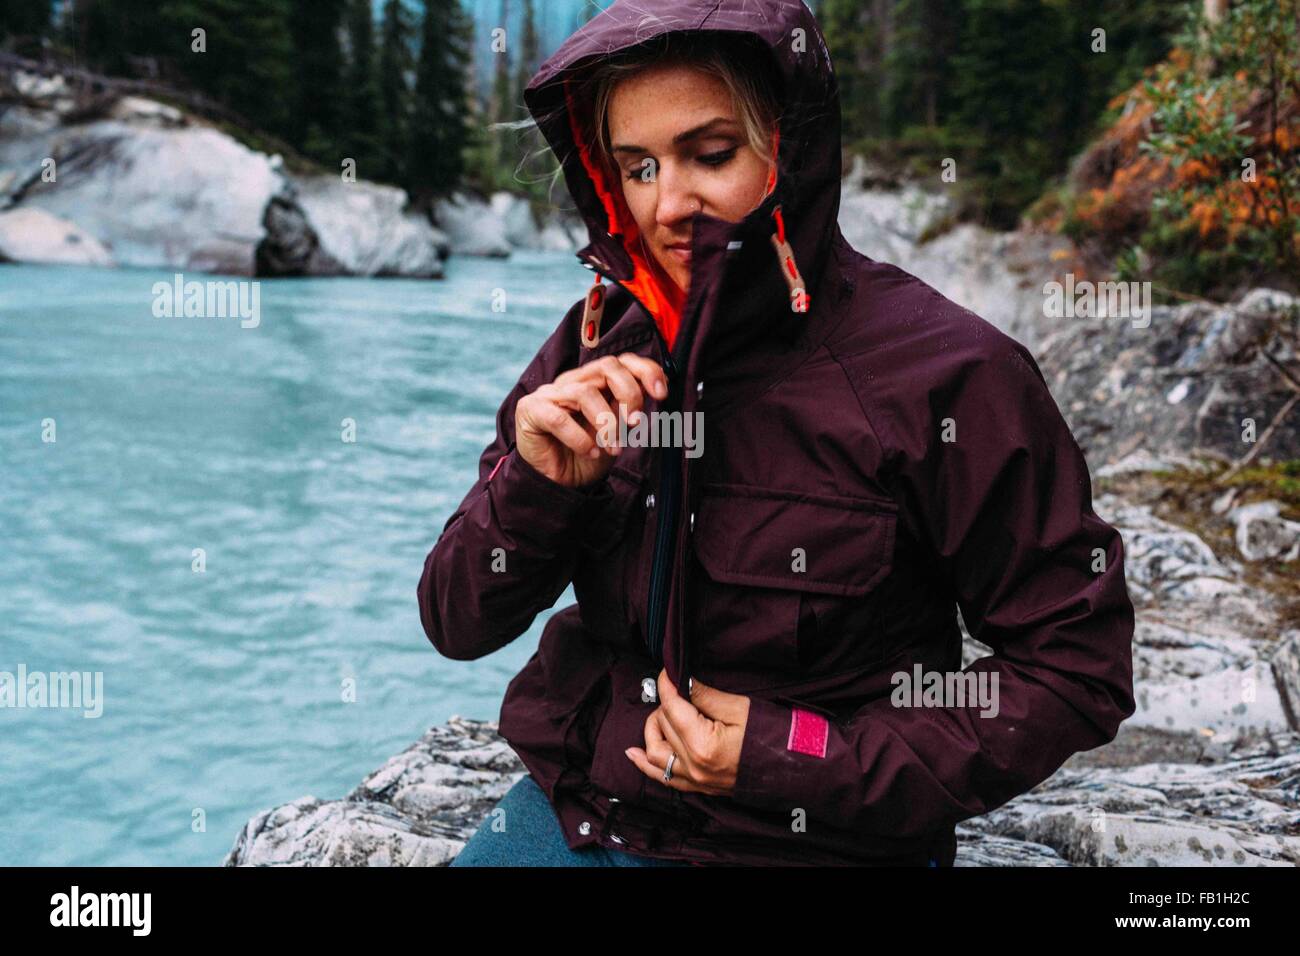 Mid adult woman by waters edge zipping up waterproof coat, Moraine lake, Banff National Park, Alberta Canada Stock Photo